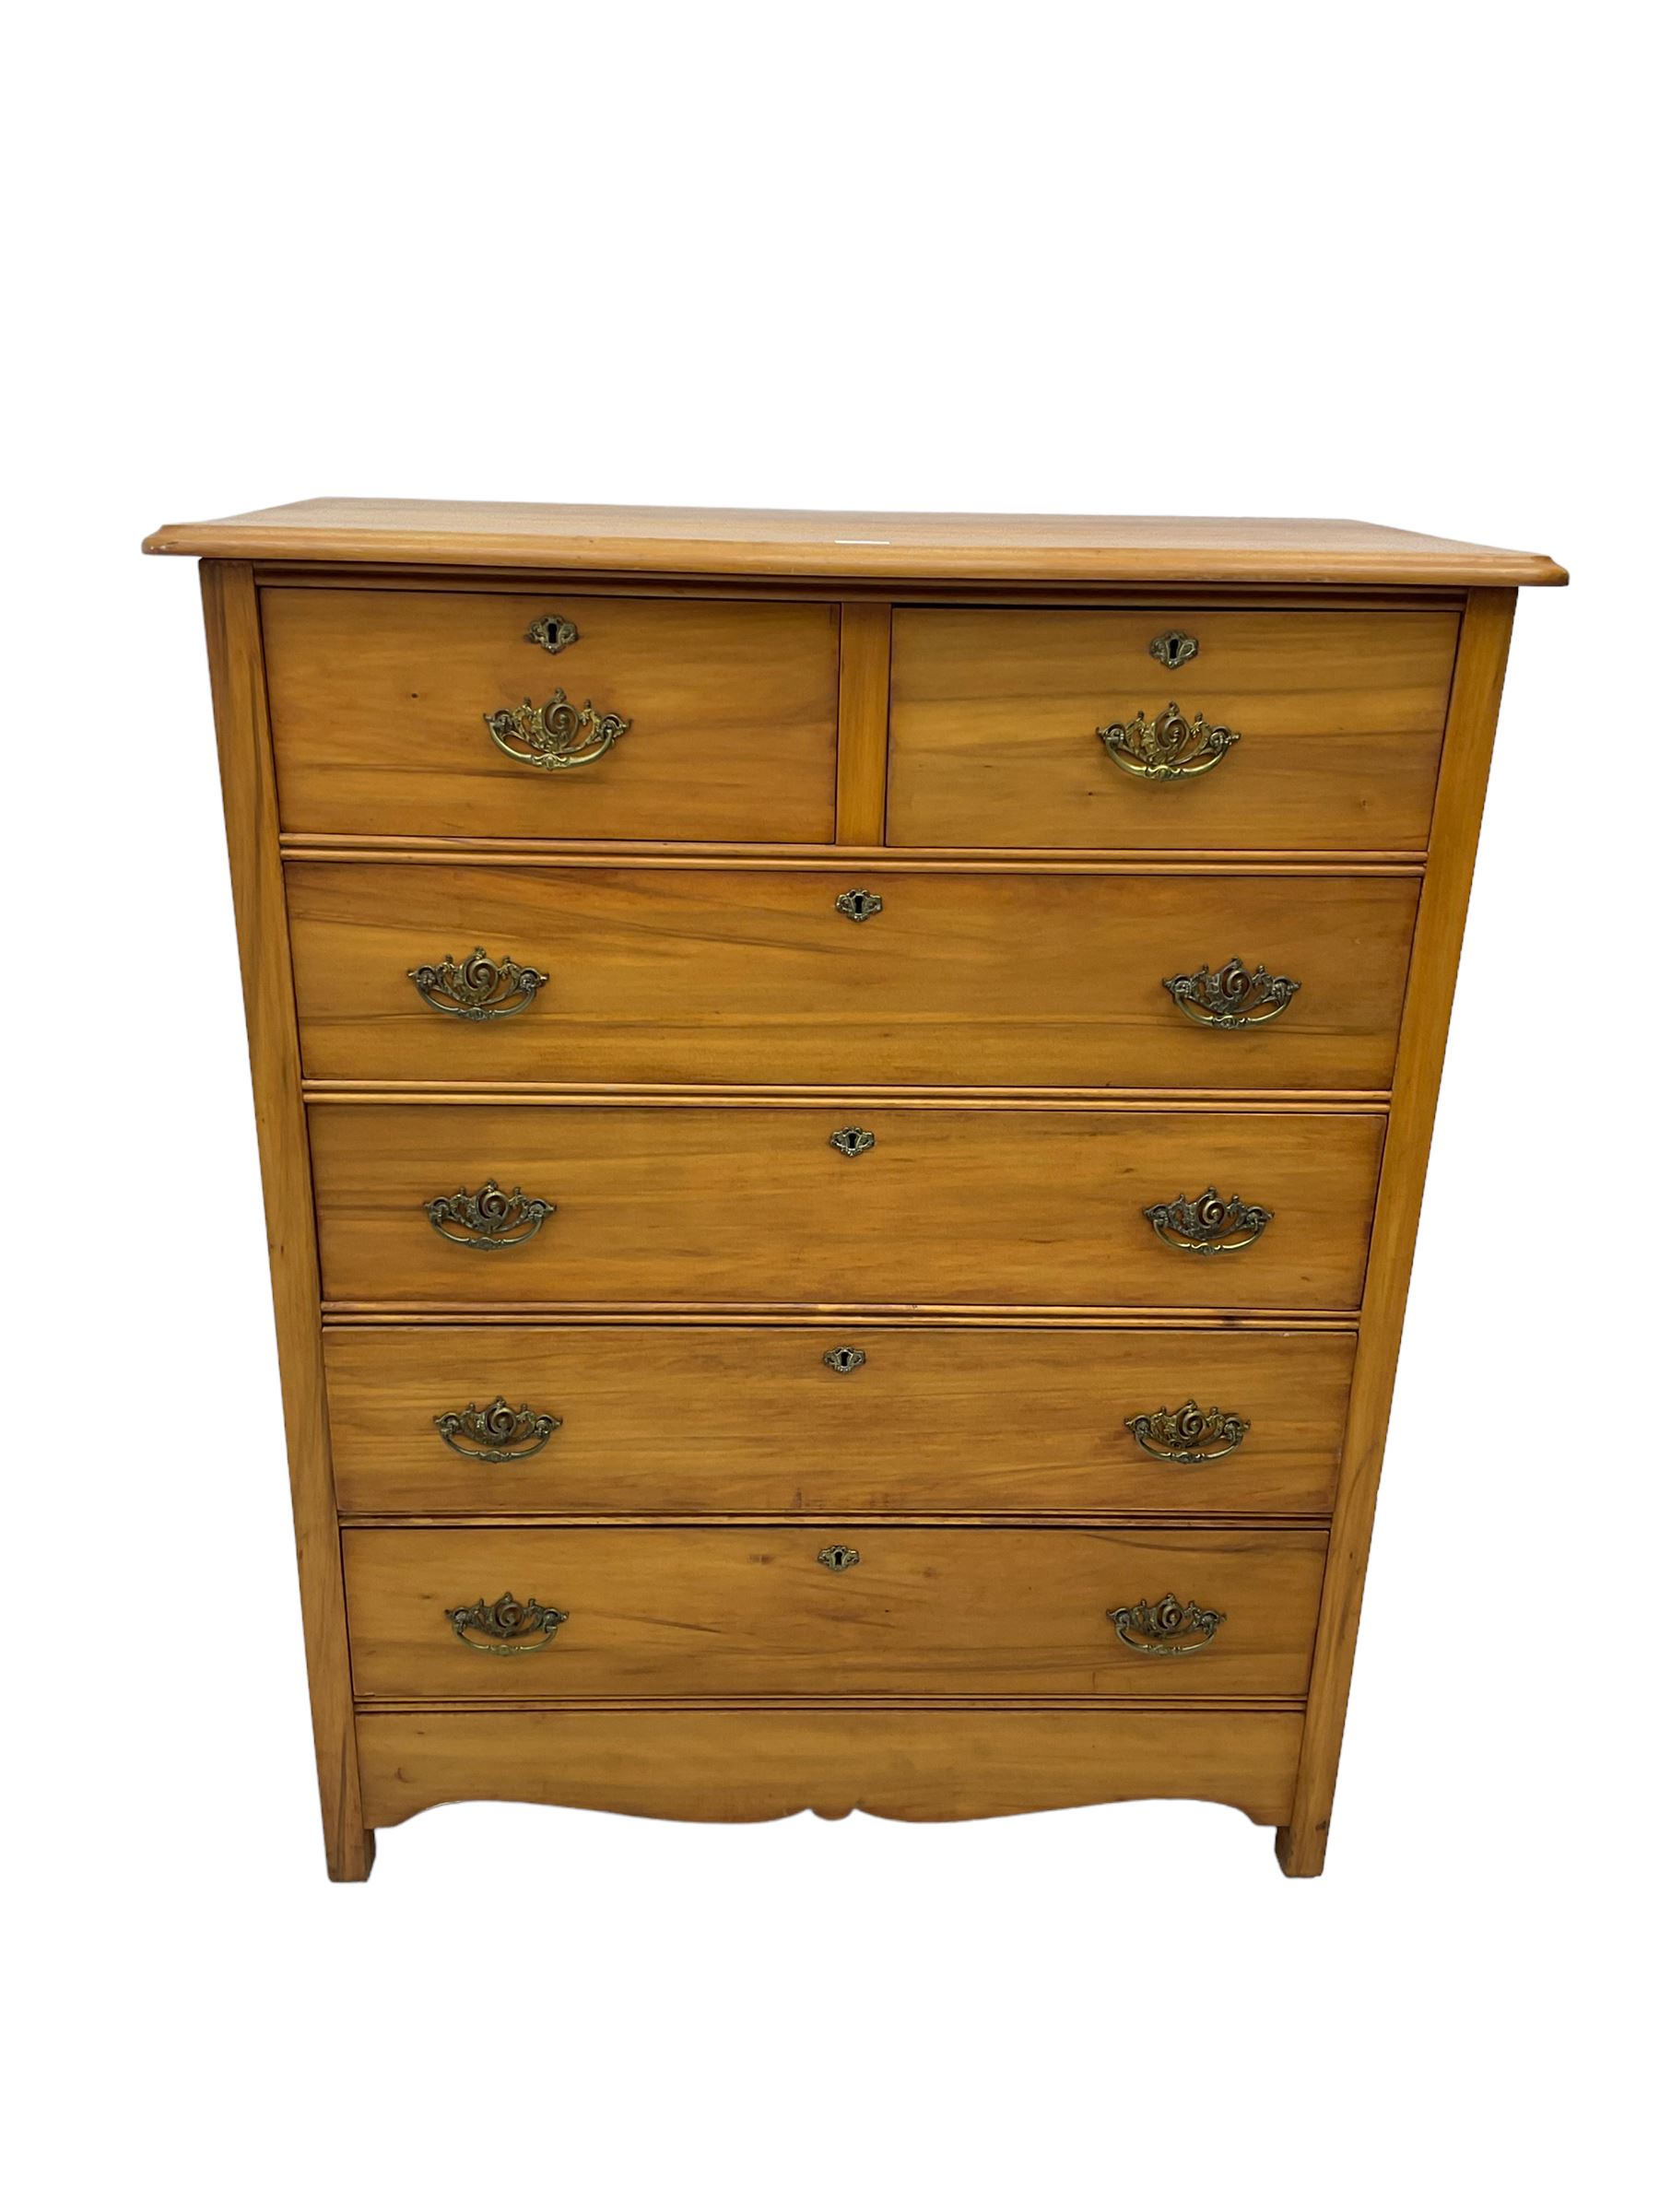 Late Victorian satin walnut chest - Image 2 of 5